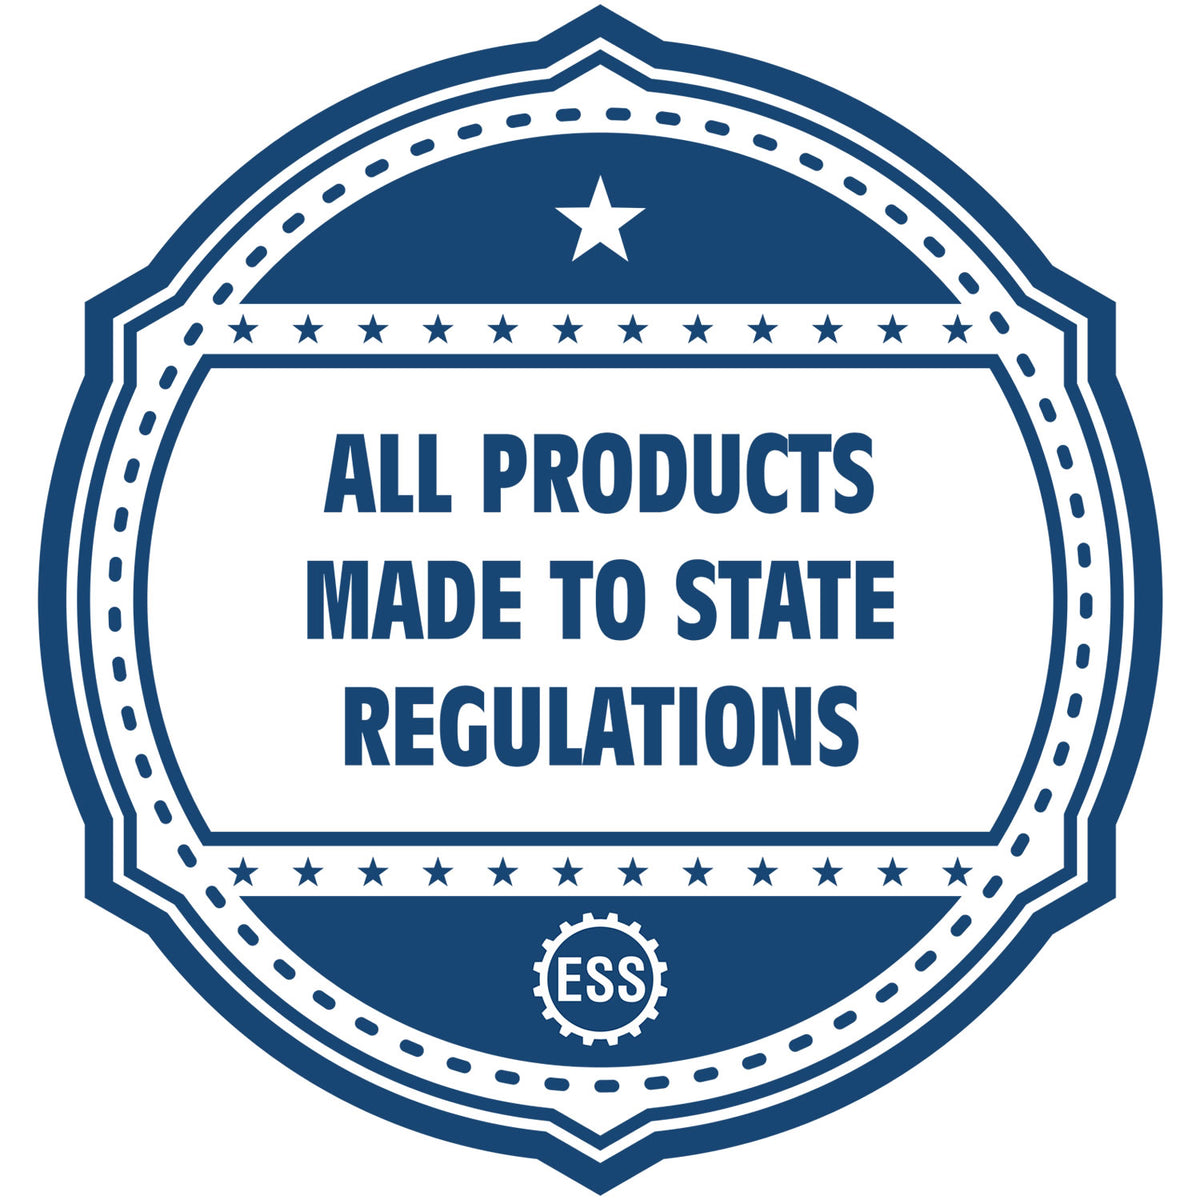 An icon or badge element for the Handheld Kansas Land Surveyor Seal showing that this product is made in compliance with state regulations.